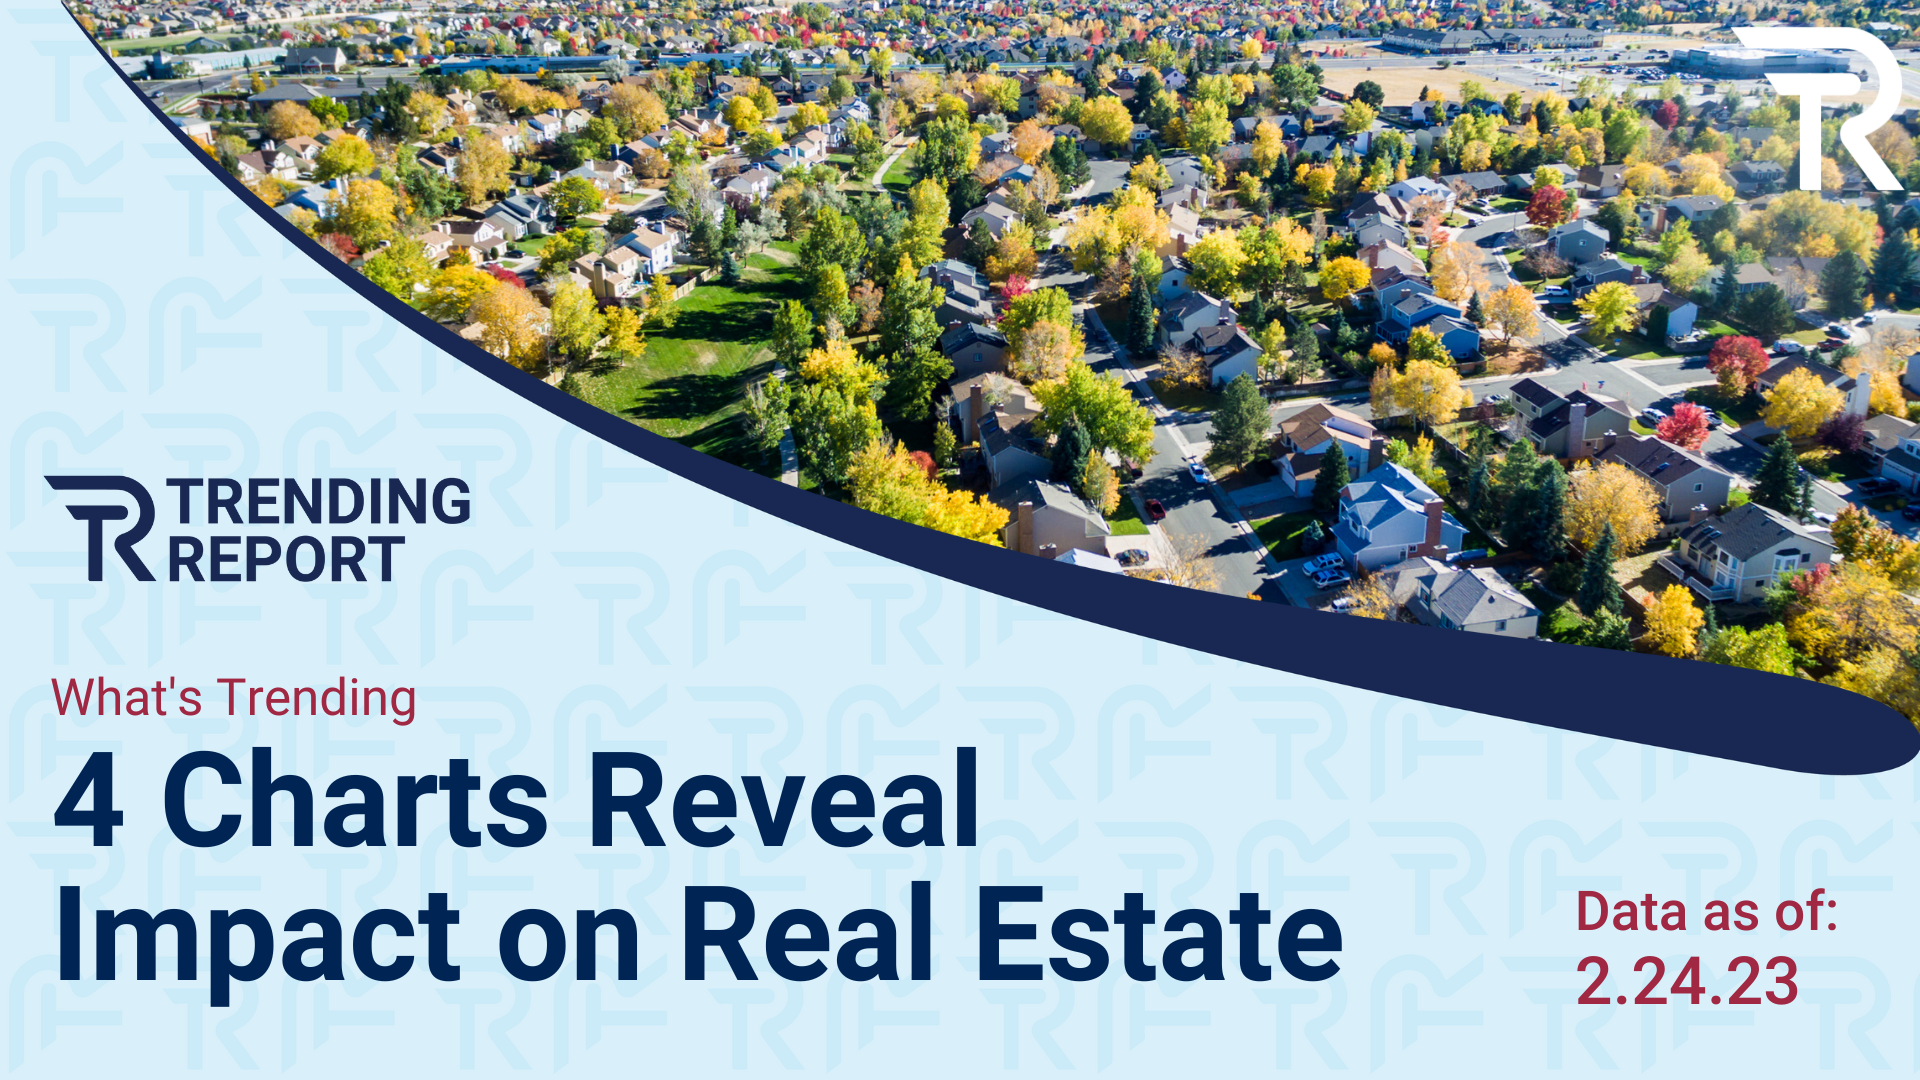 What's Trending: 4 Charts Reveal Impact on Real Estate